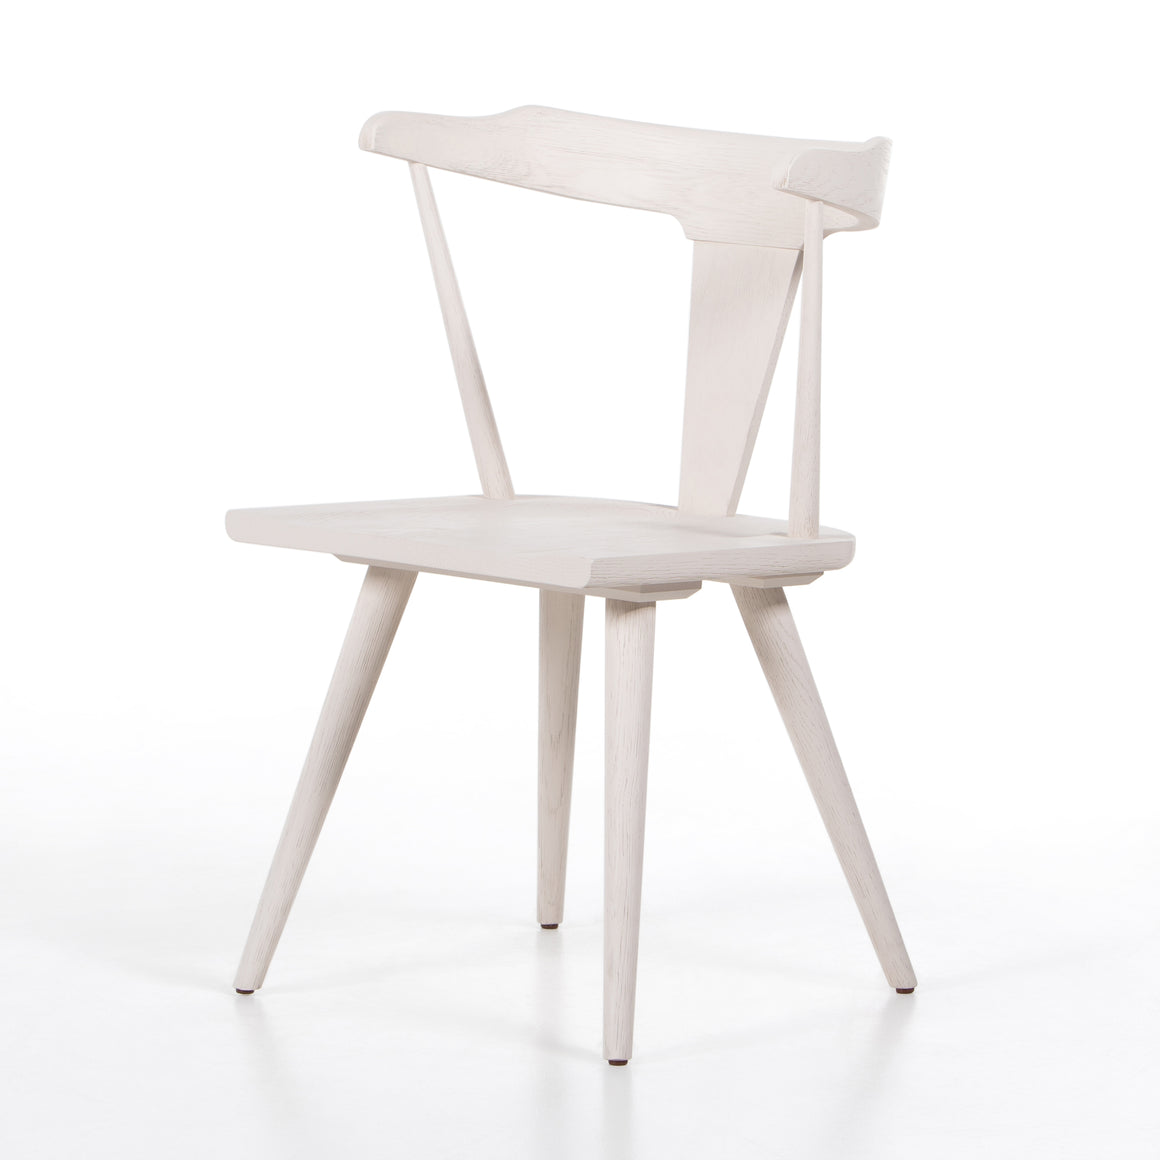 Ripley Windsor Dining Chair - Off White